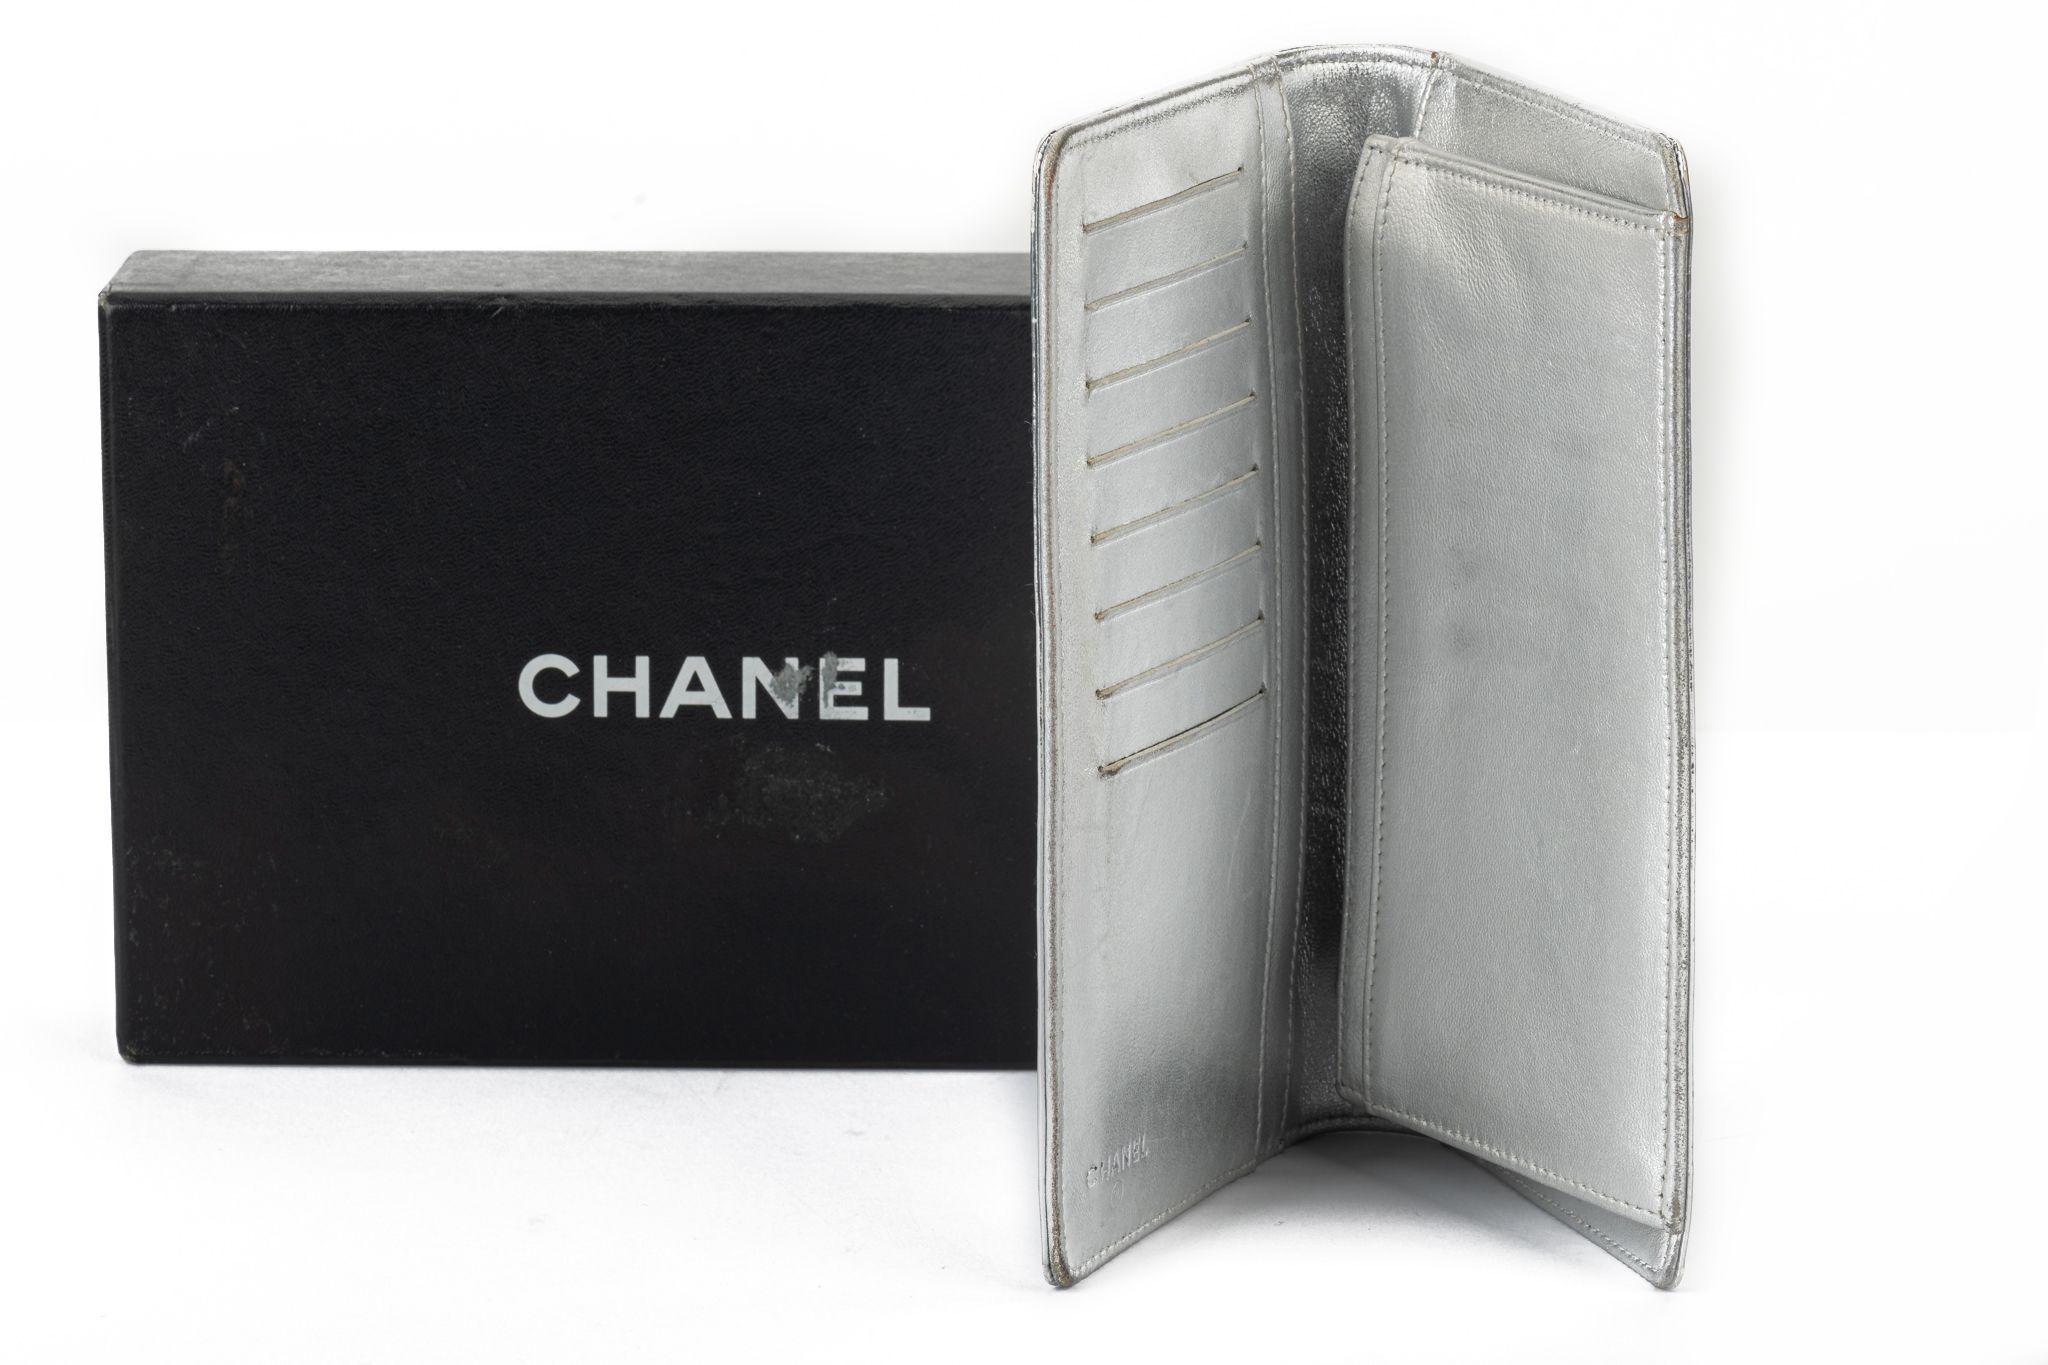 Chanel silver symbols large wallet. Preloved condition, minor wear on corners and interior scuffs. Collection 11. Comes with hologram and original dust cover.